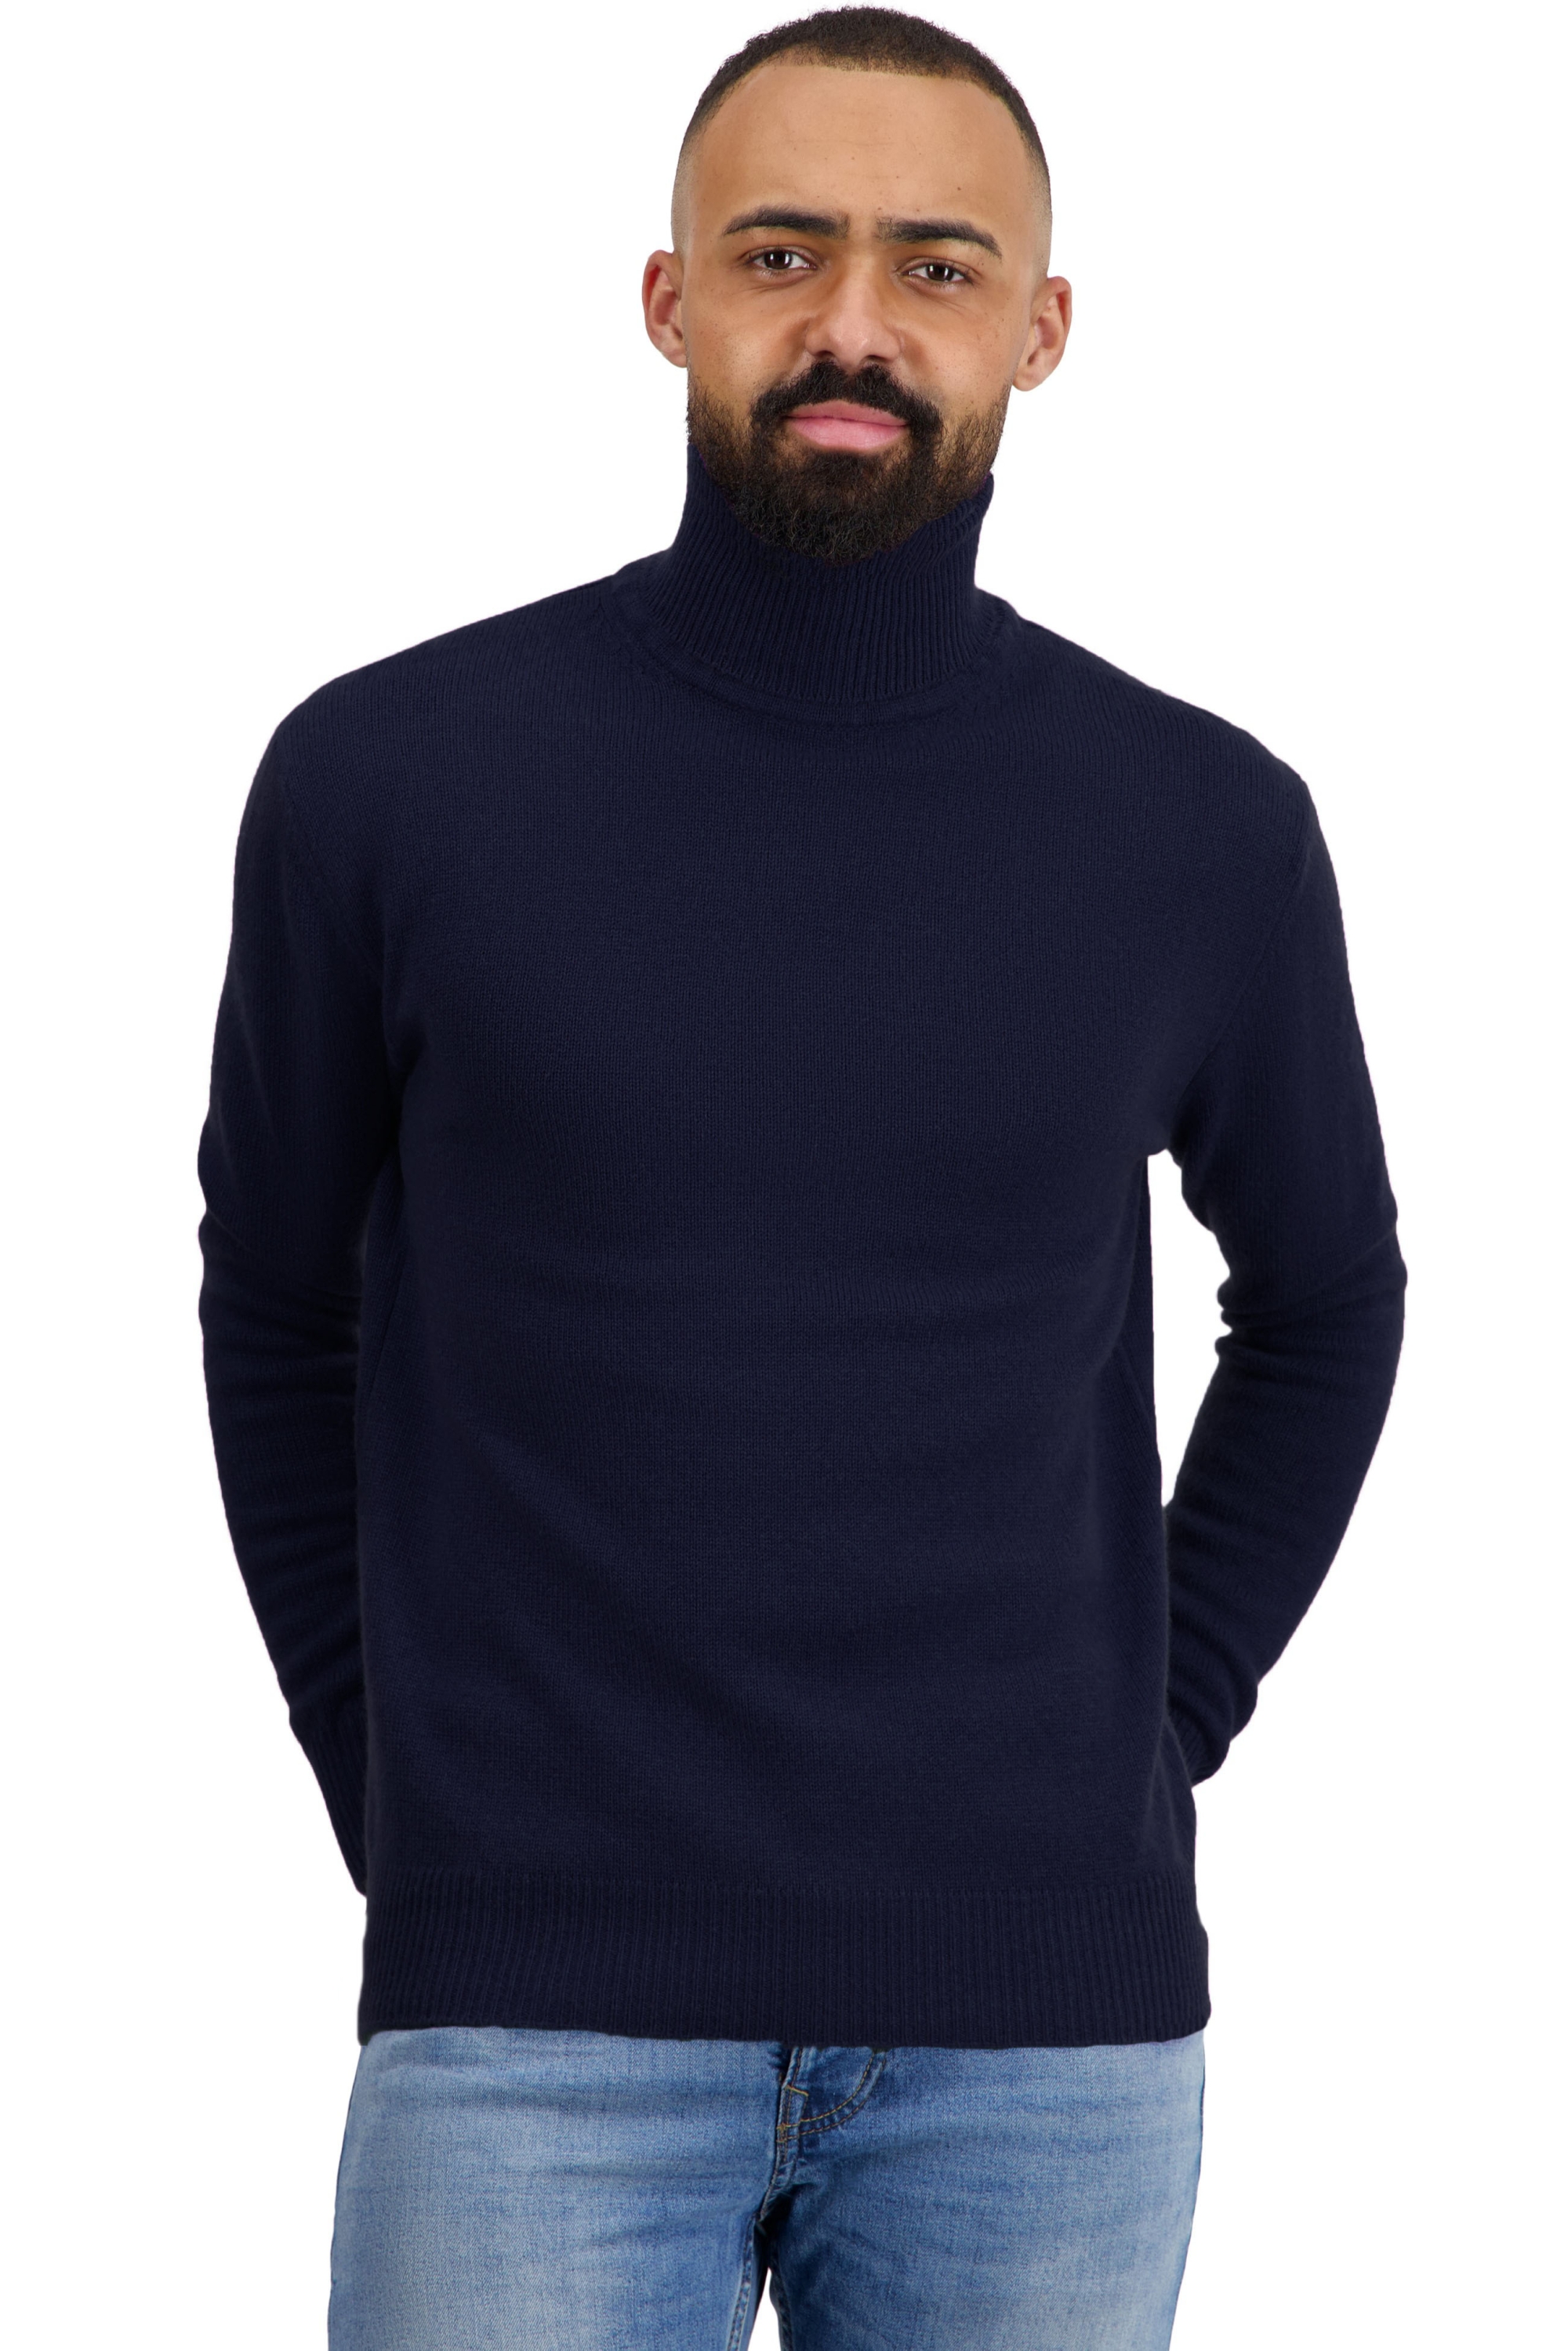 Cashmere men basic sweaters at low prices torino first dress blue l